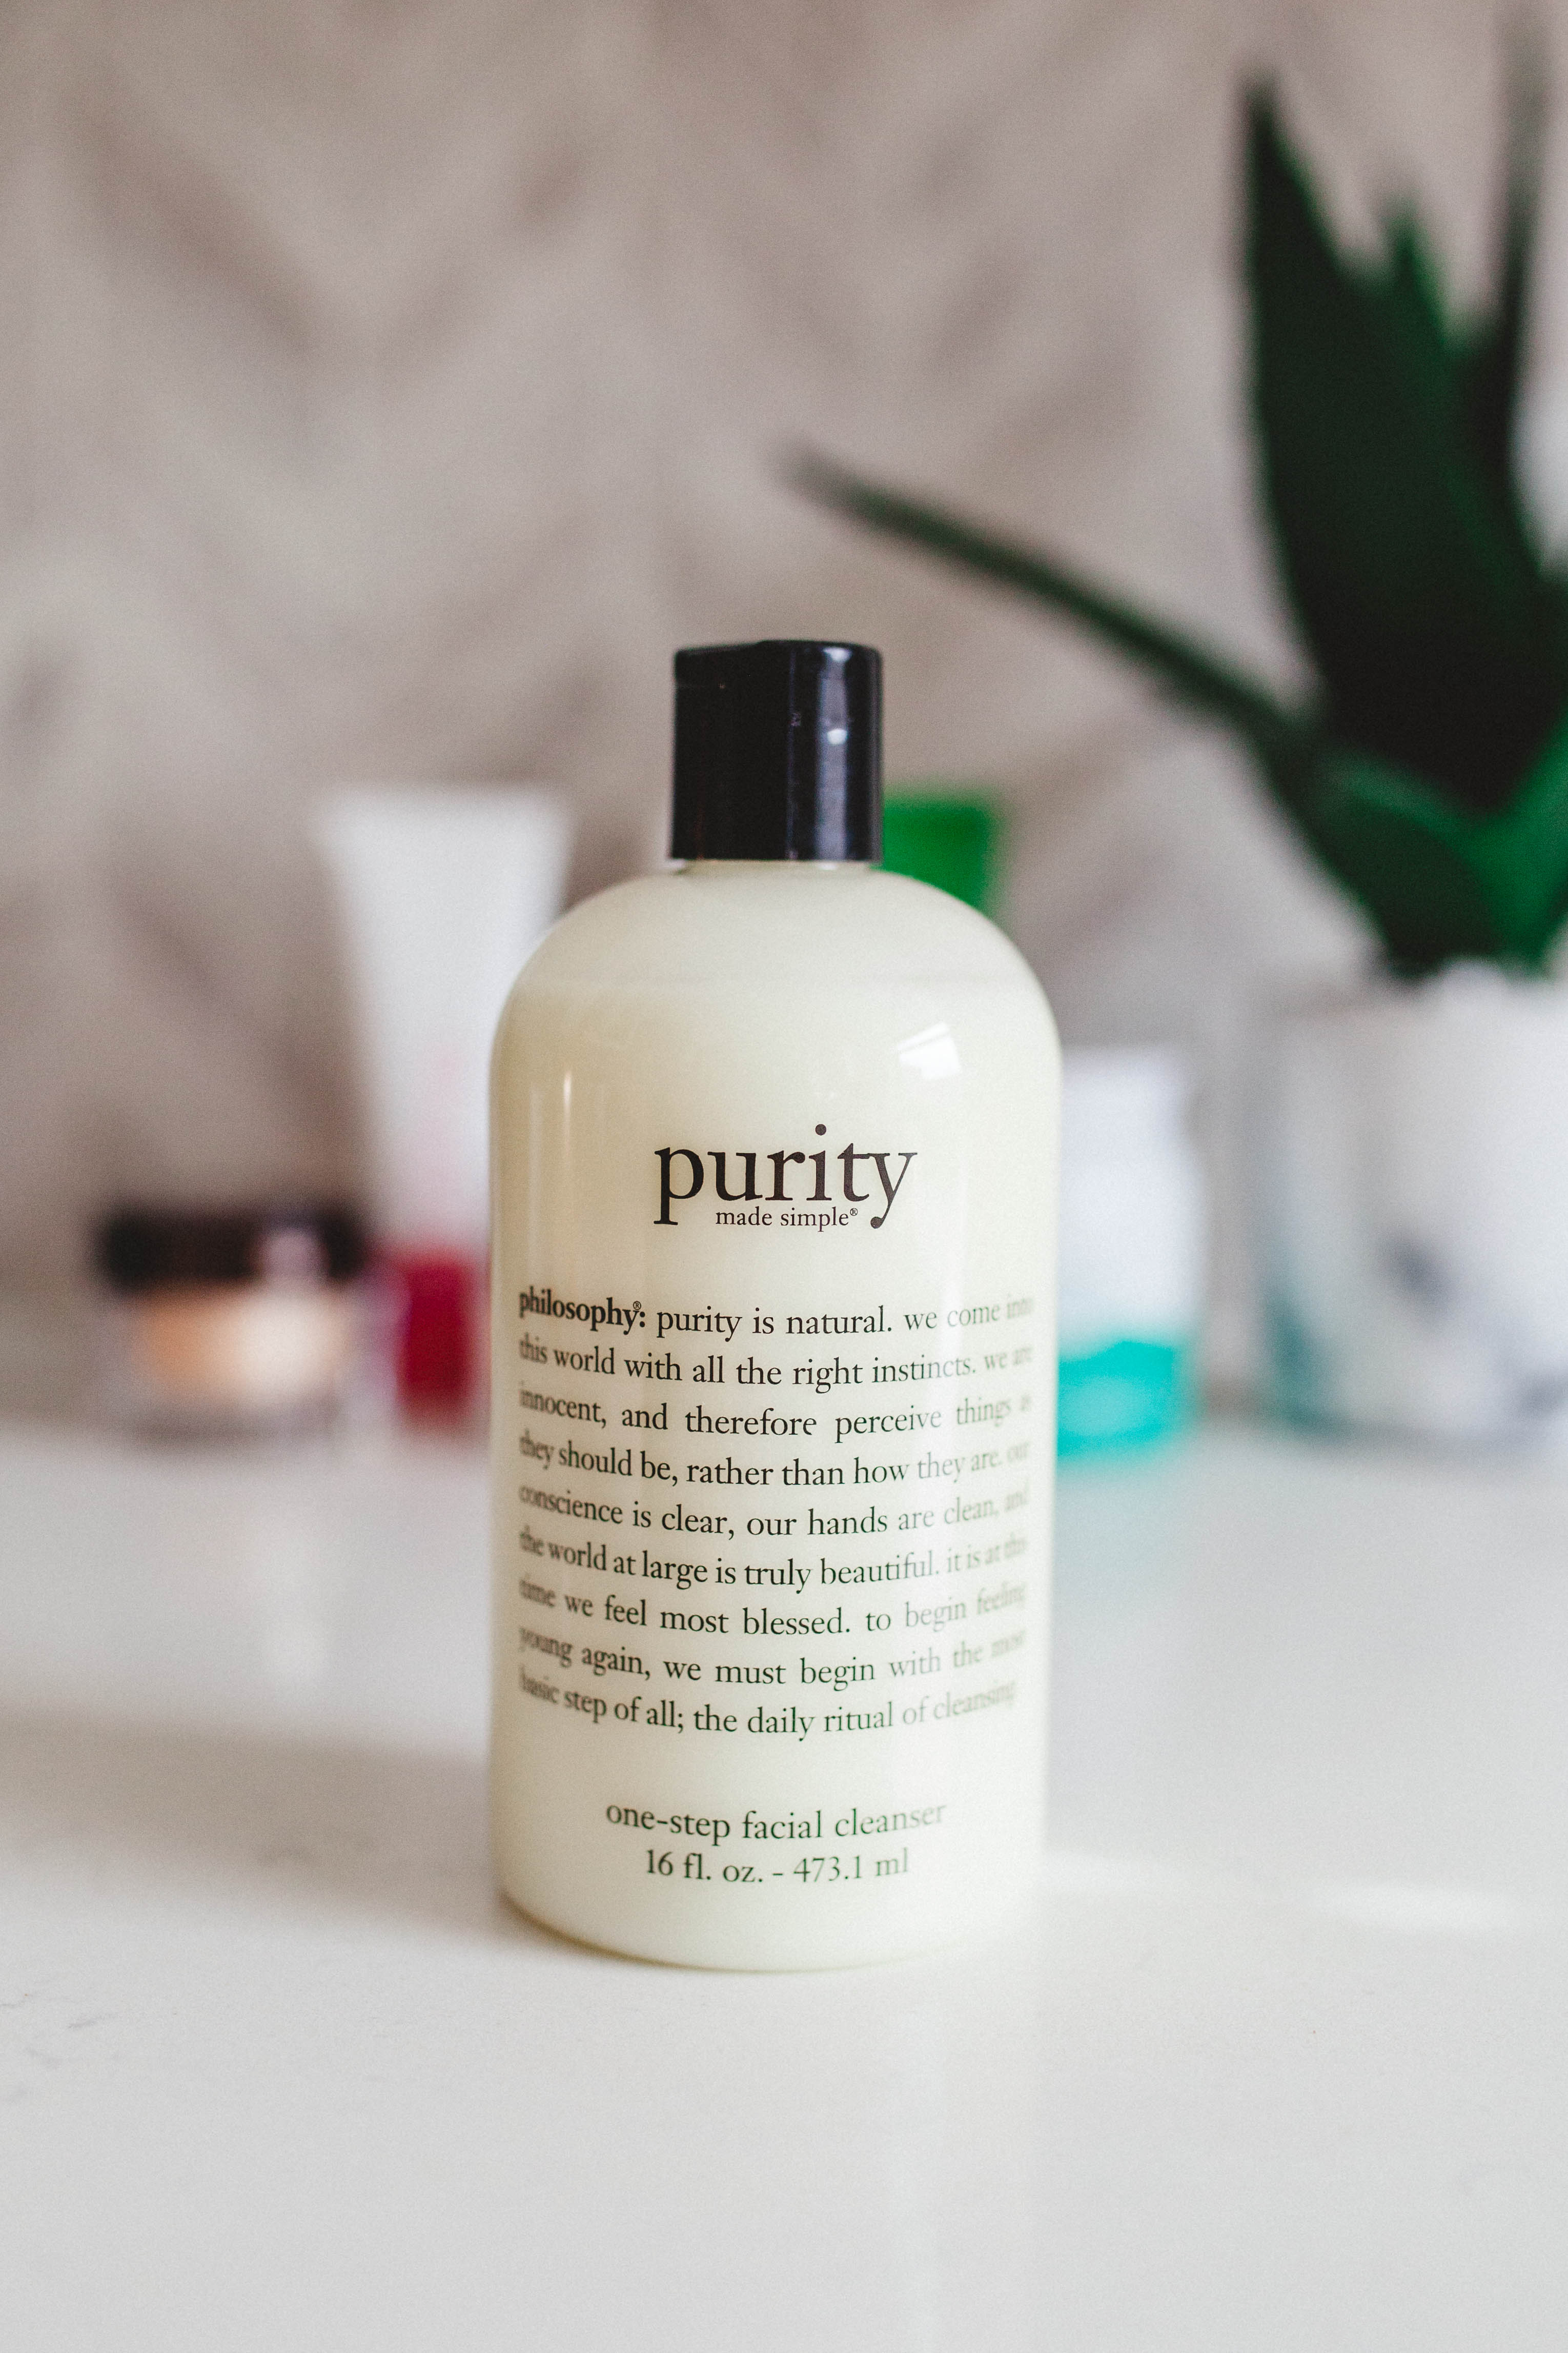 Hoang-Kim's 2018 Spring Skincare Routine featuring Purity Cleanser